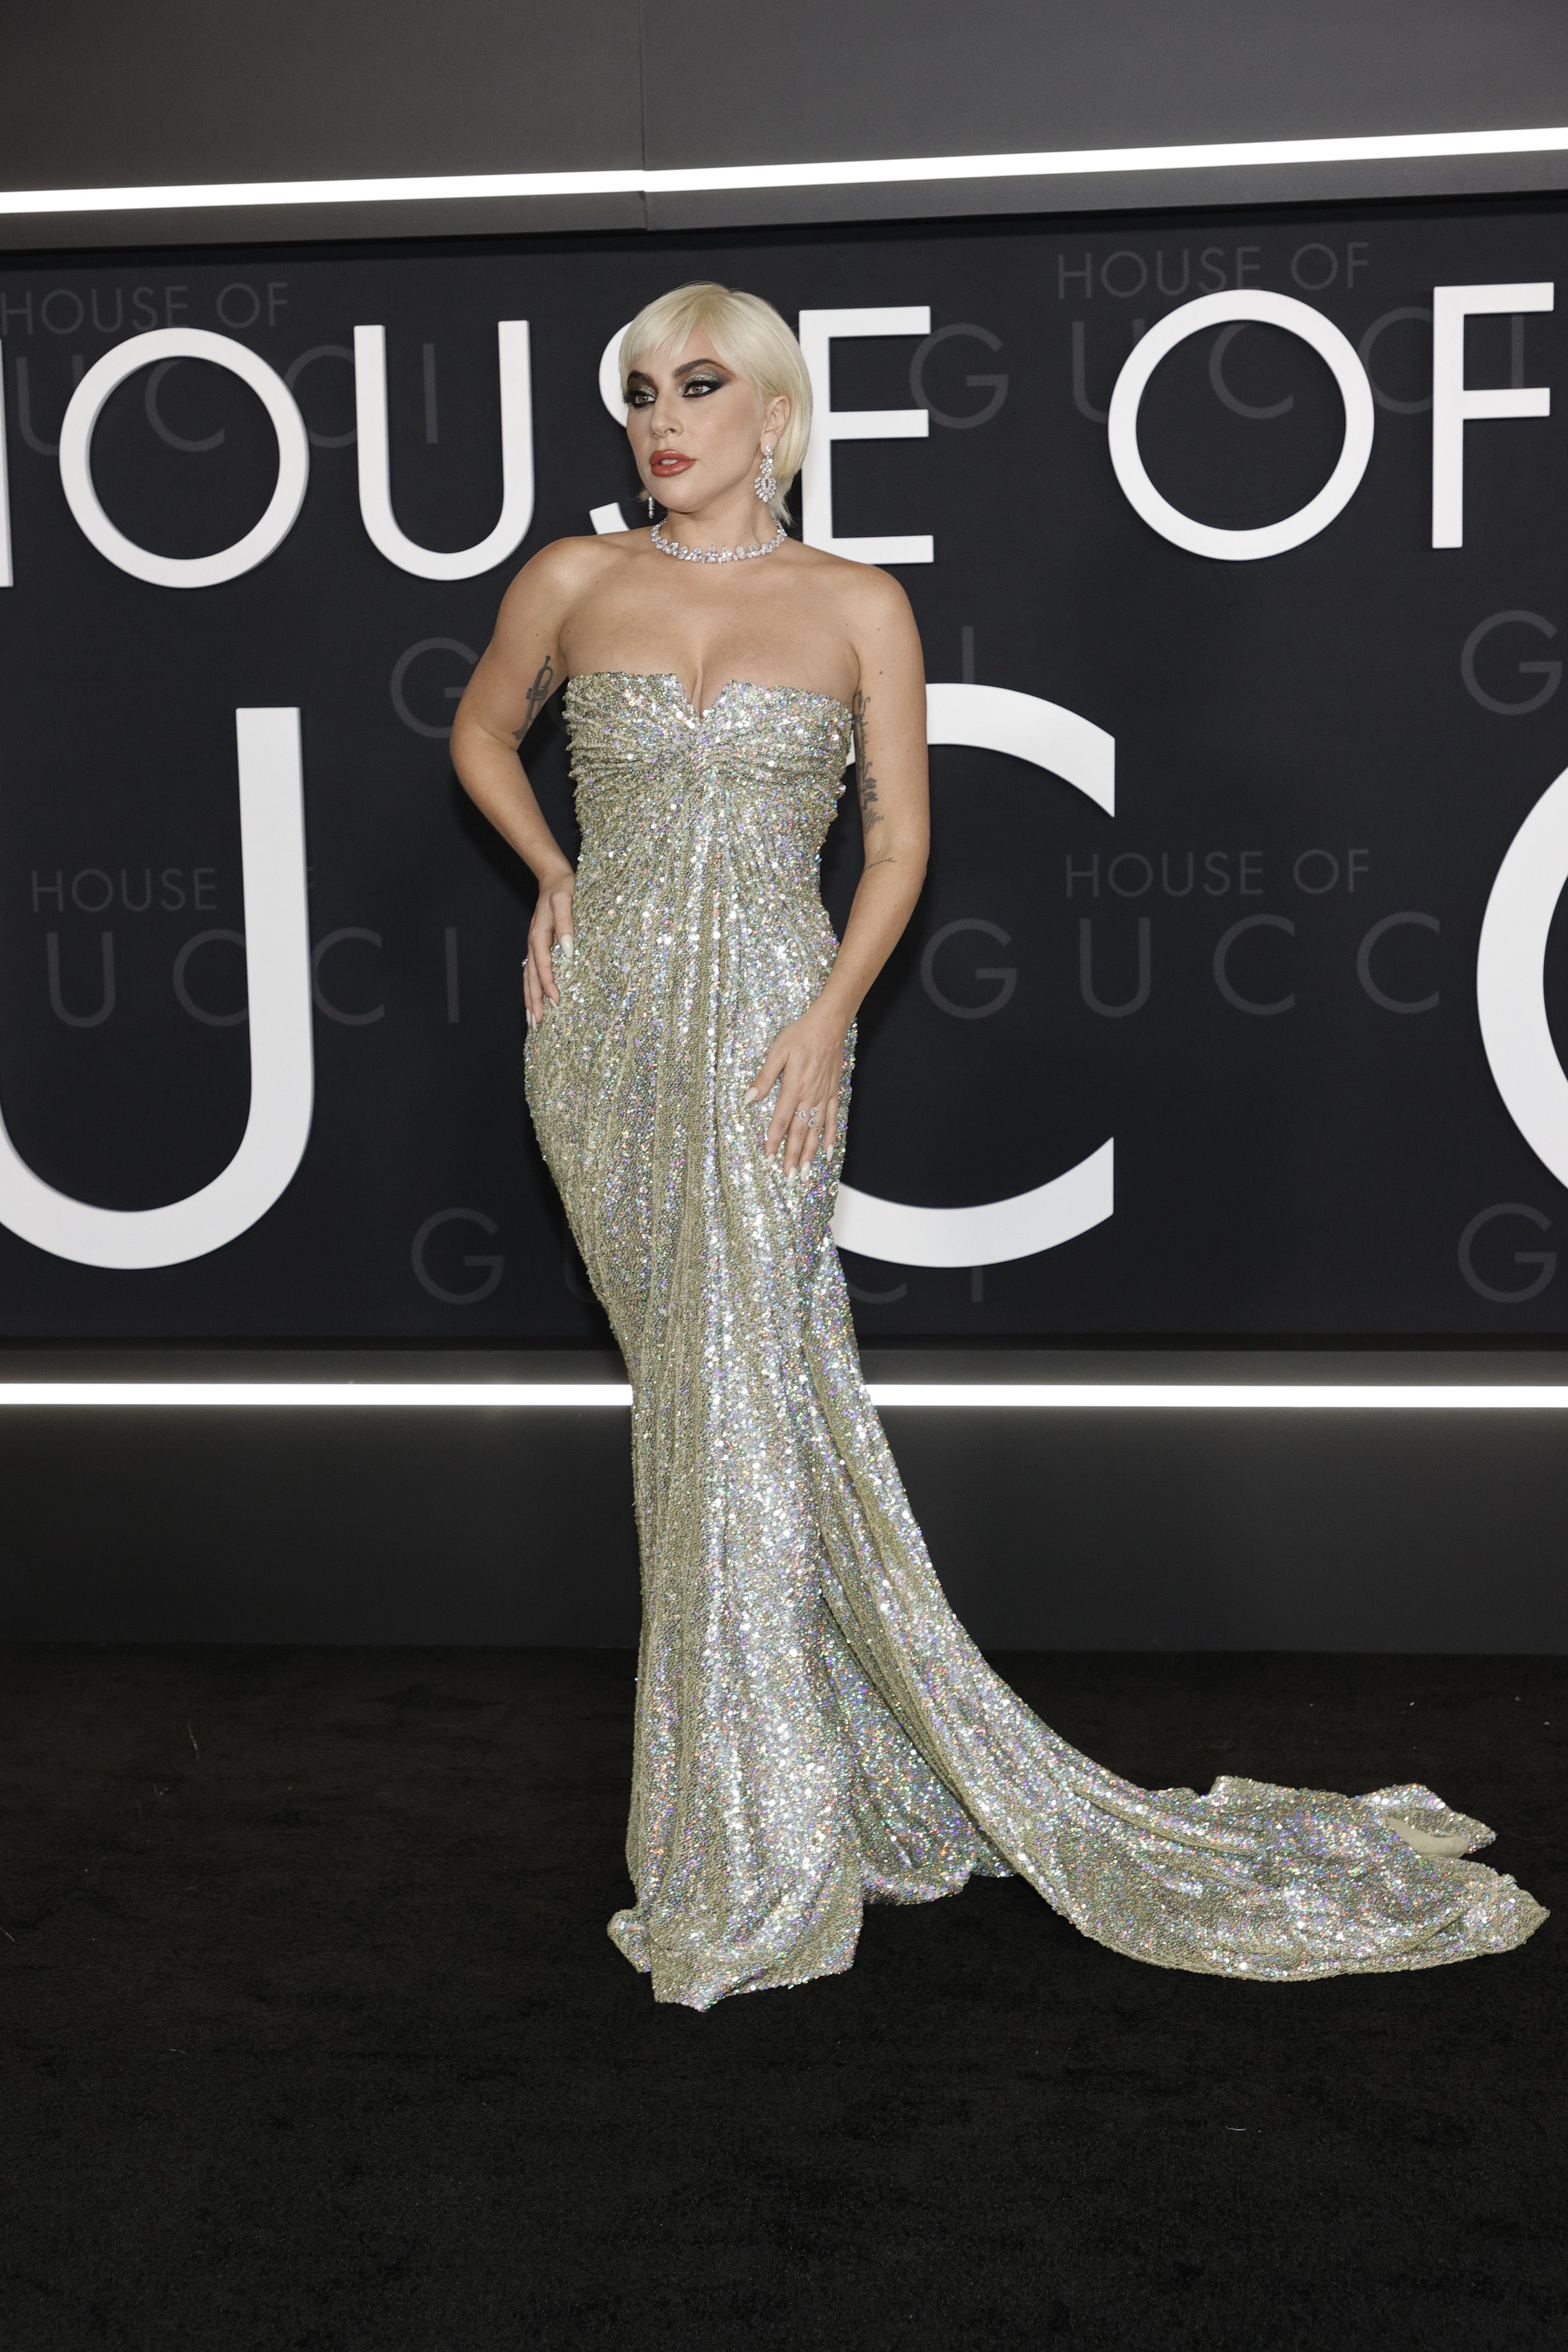 See Lady Gaga's Best 'House of Gucci' Red-Carpet Looks